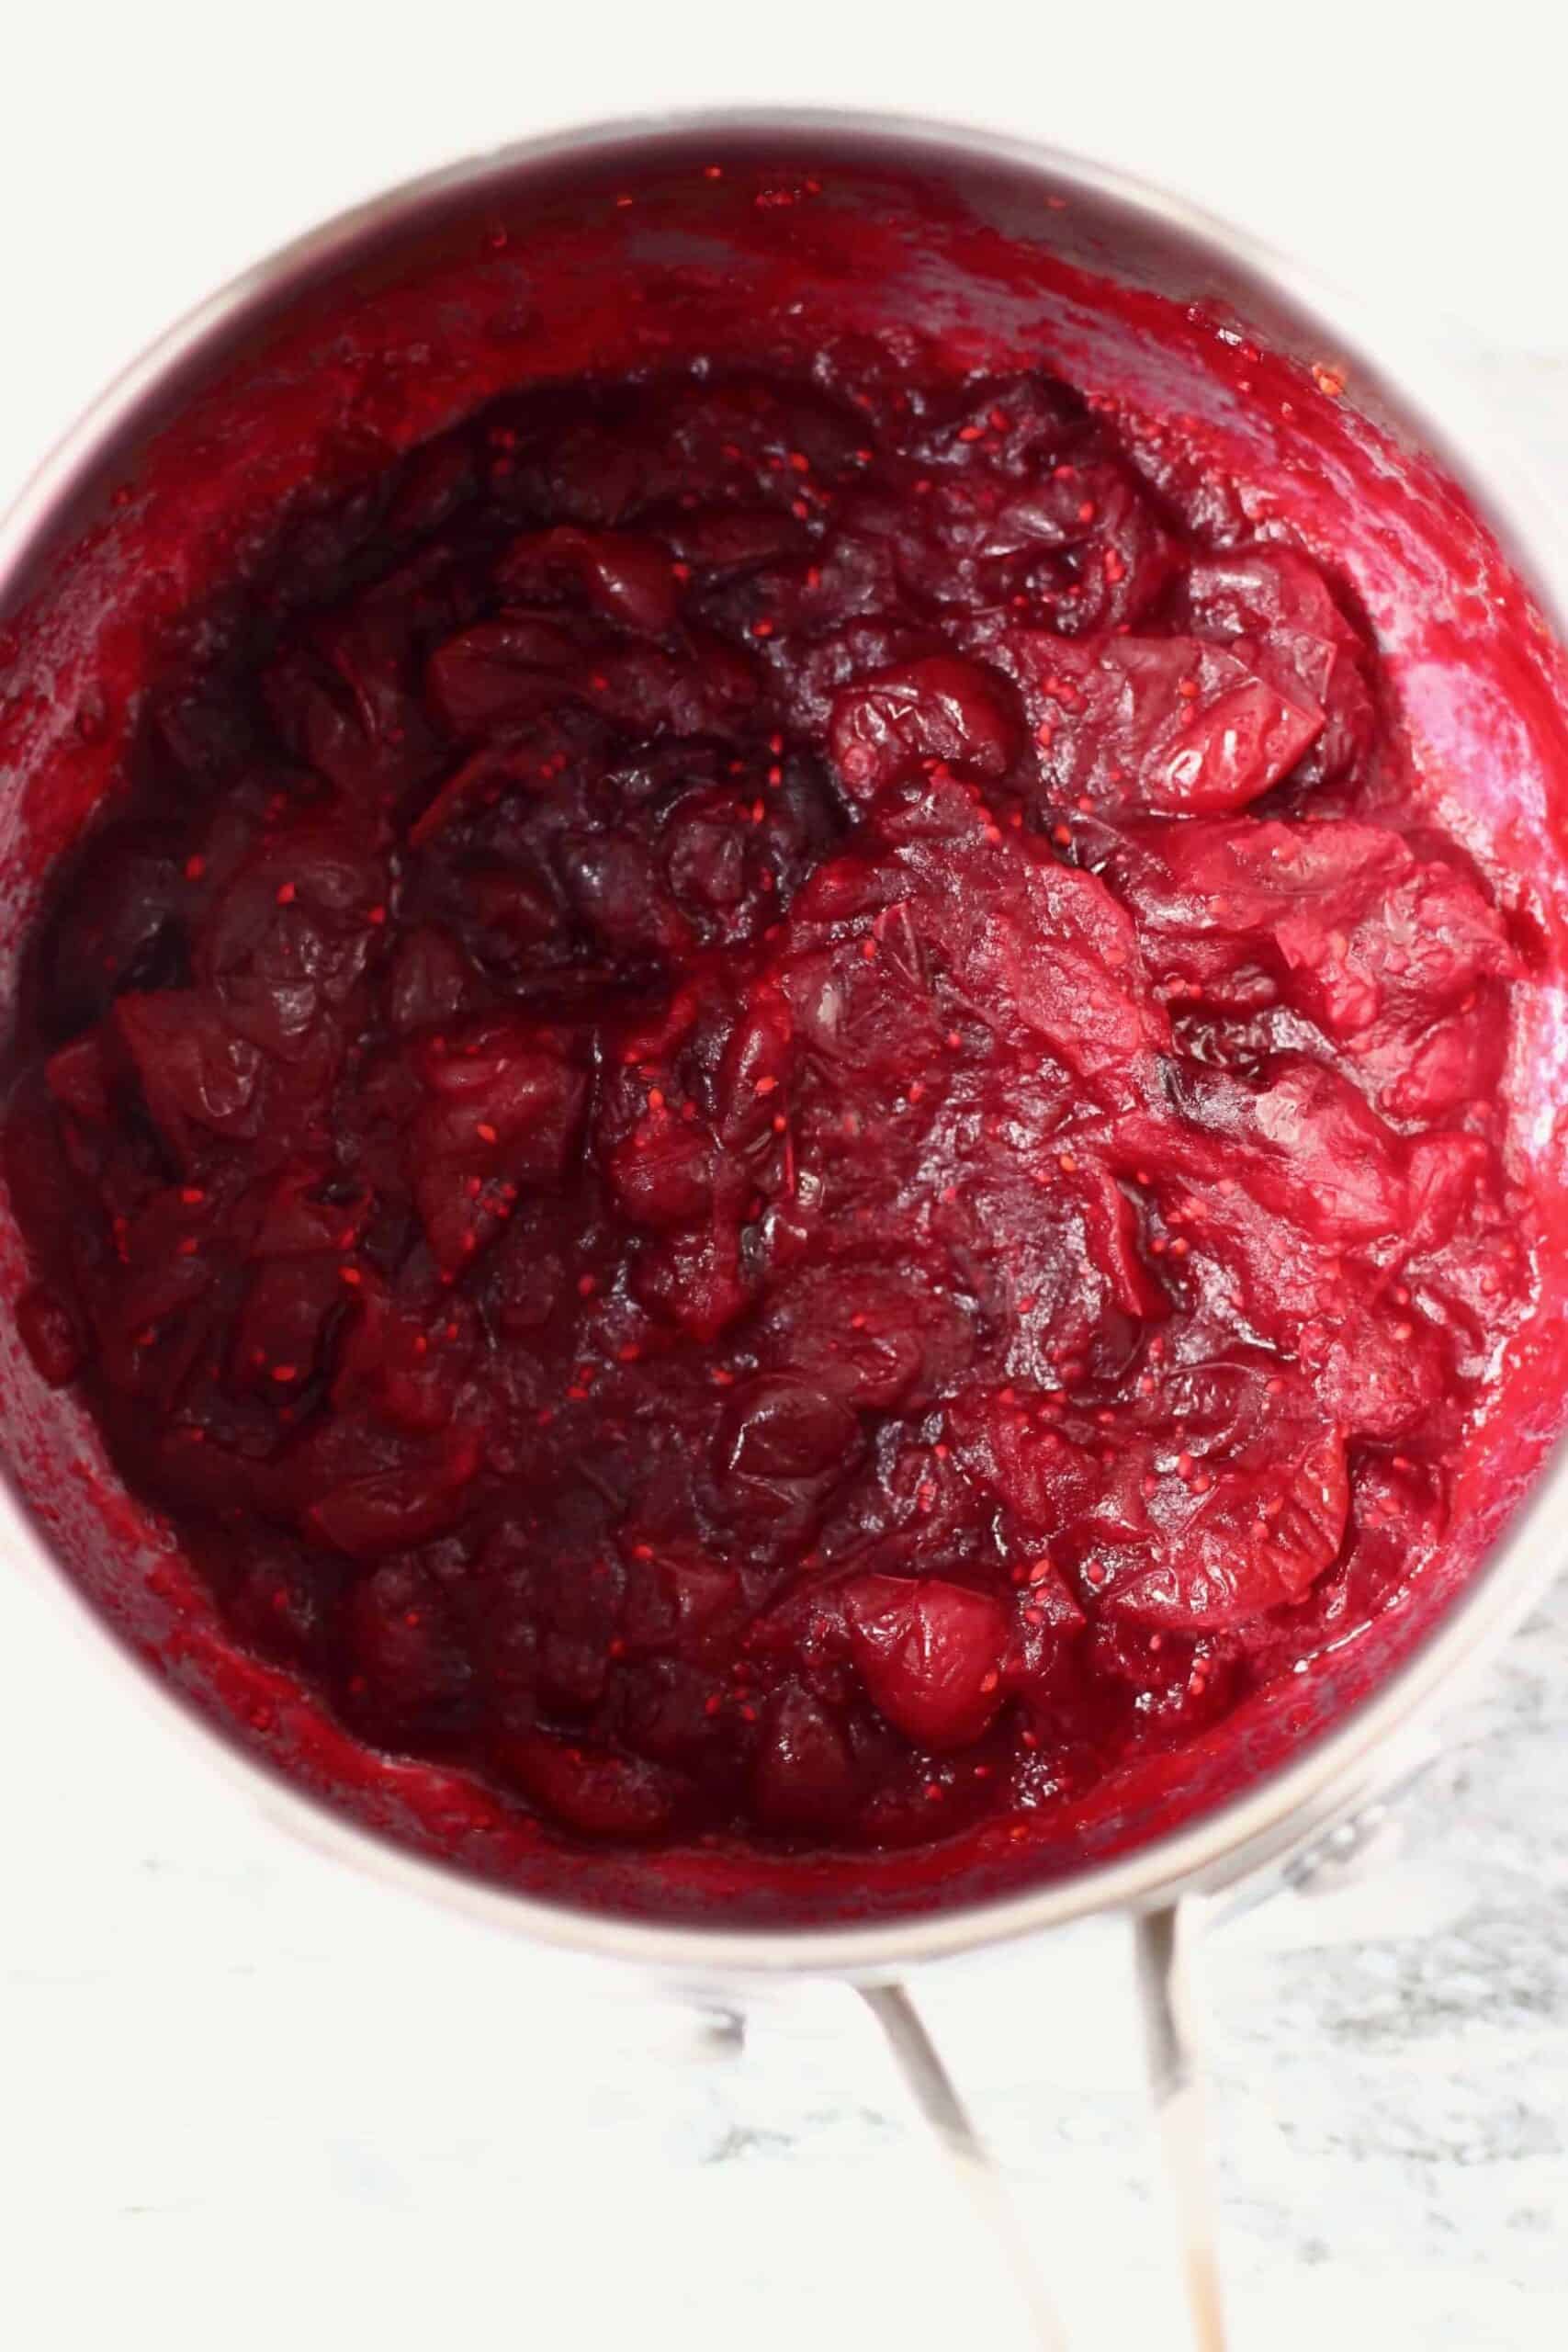 Sugar free cranberry sauce in a pan